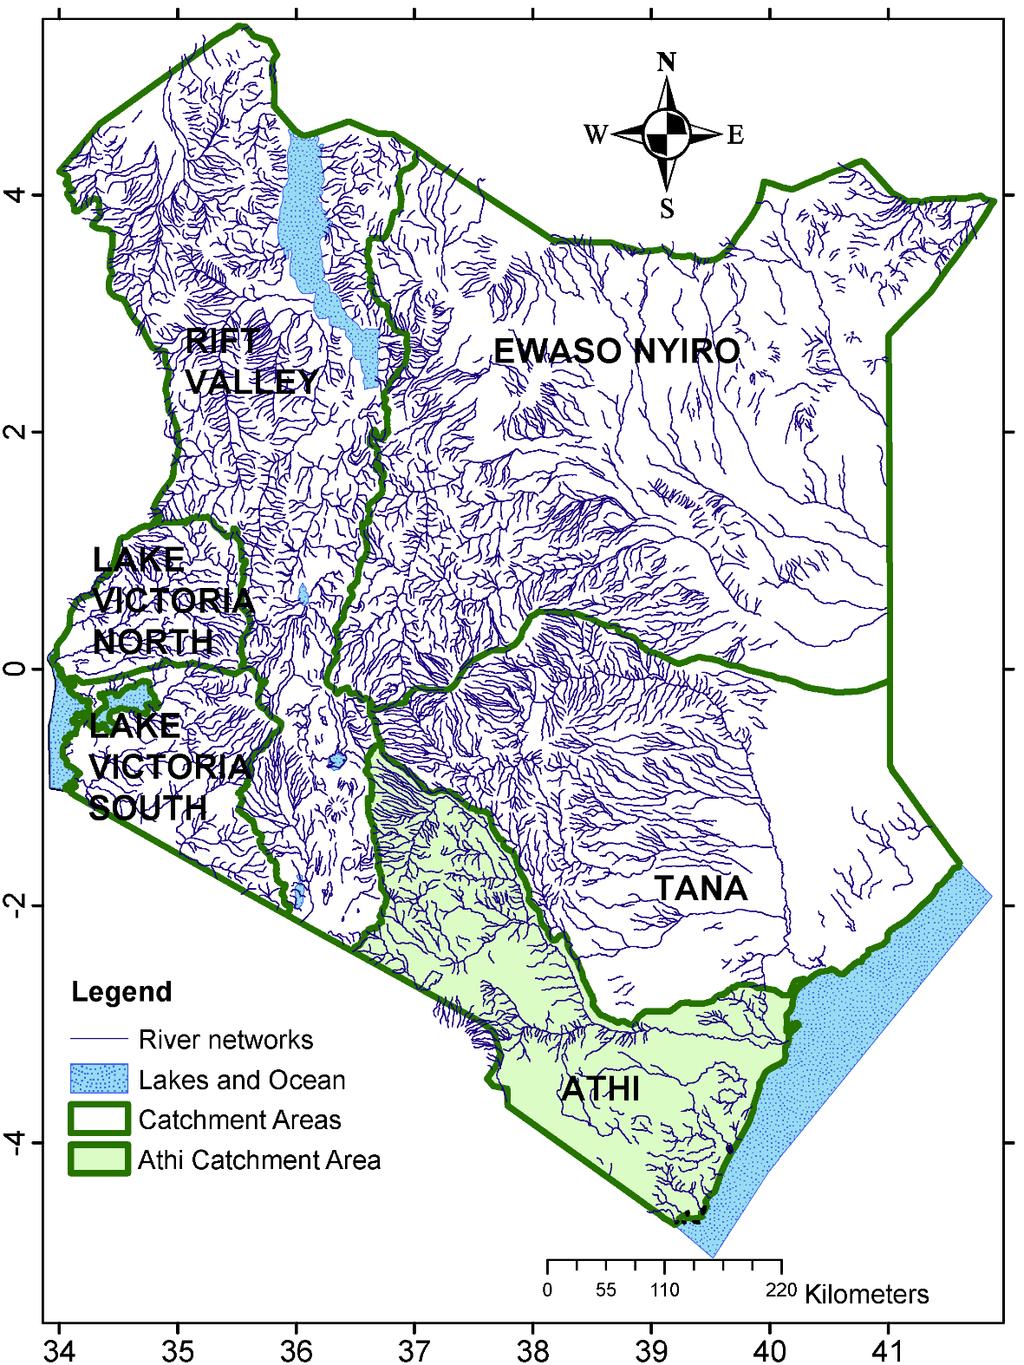 Major drainage systems in Kenya Lake Victoria, covering 8.0 percent of the country; Rift valley and inland lakes, covering 22.5 percent of the country; Athi River and coast, covering 11.